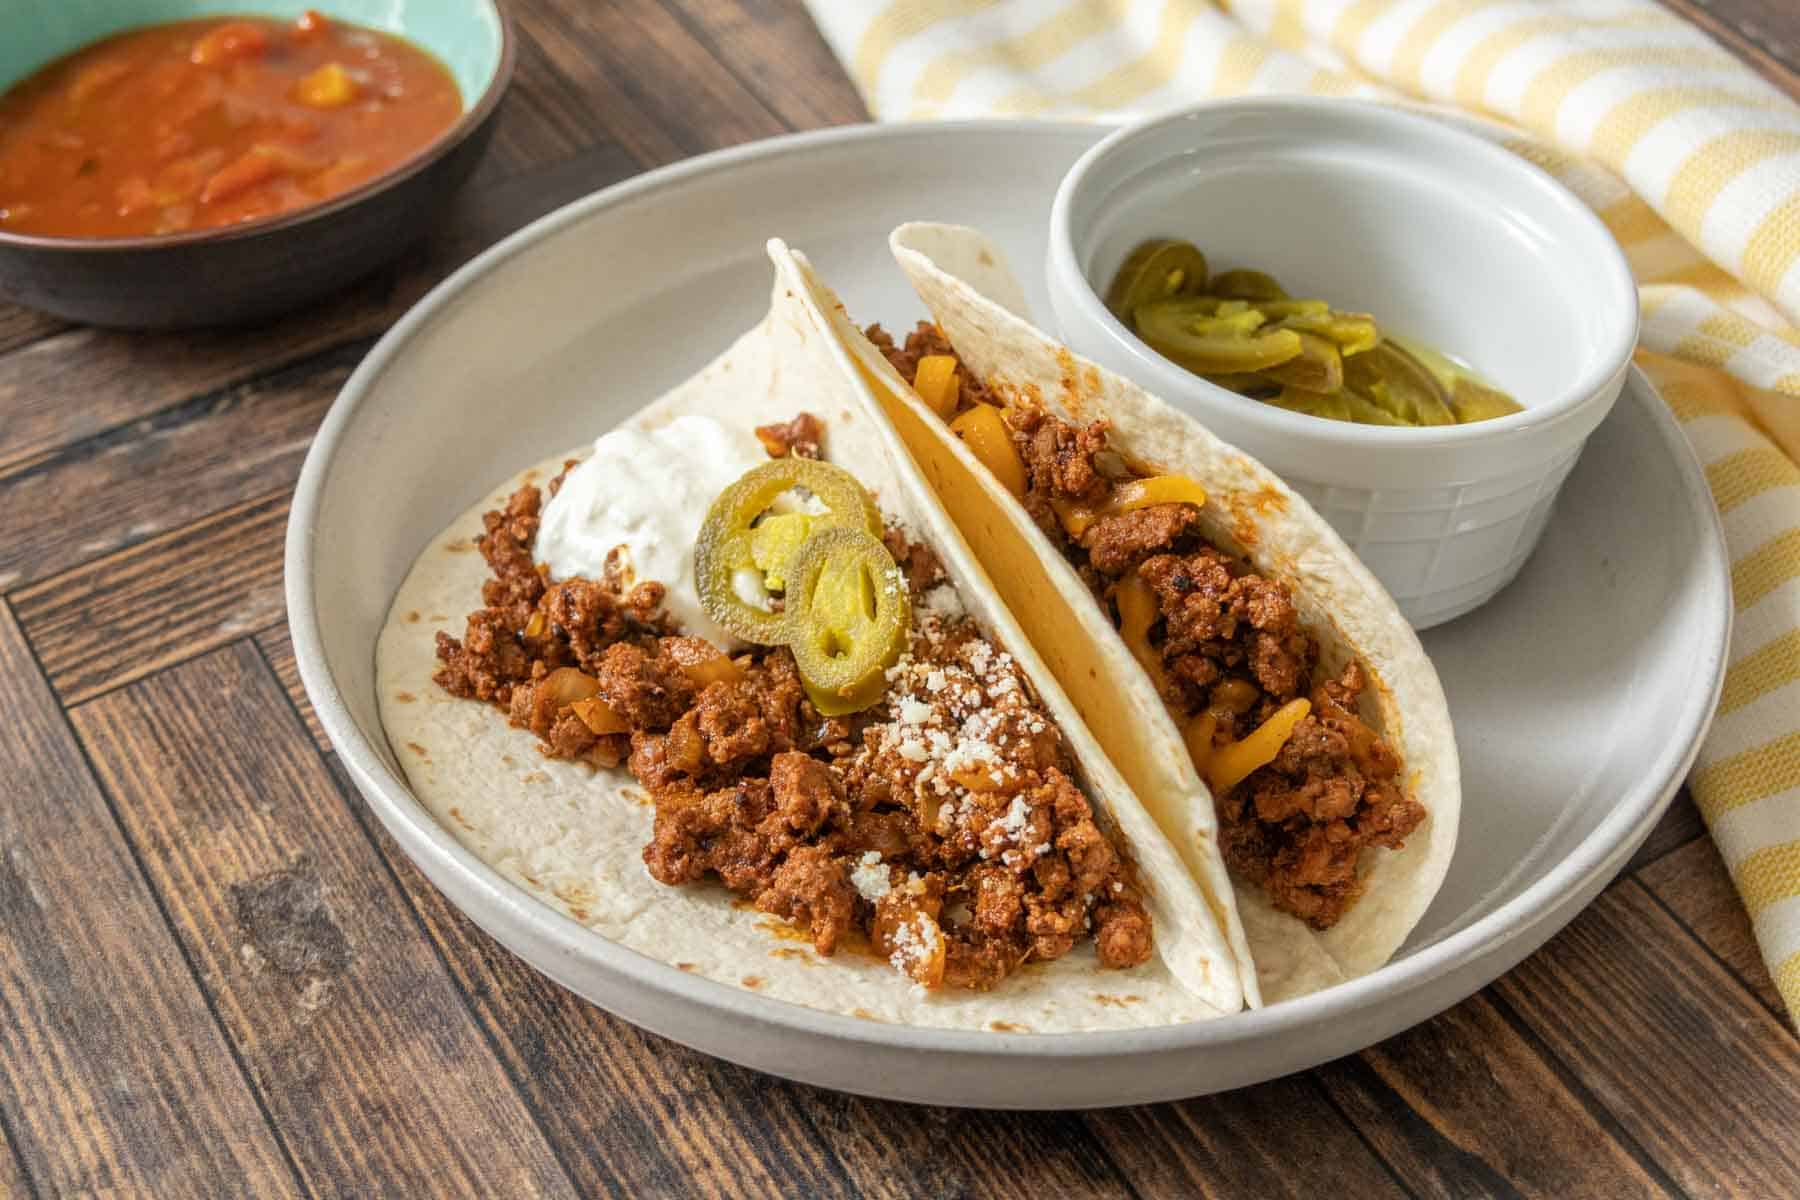 Two ground bison tacos on a plate with toppings and a bowl of pickled jalapenos.